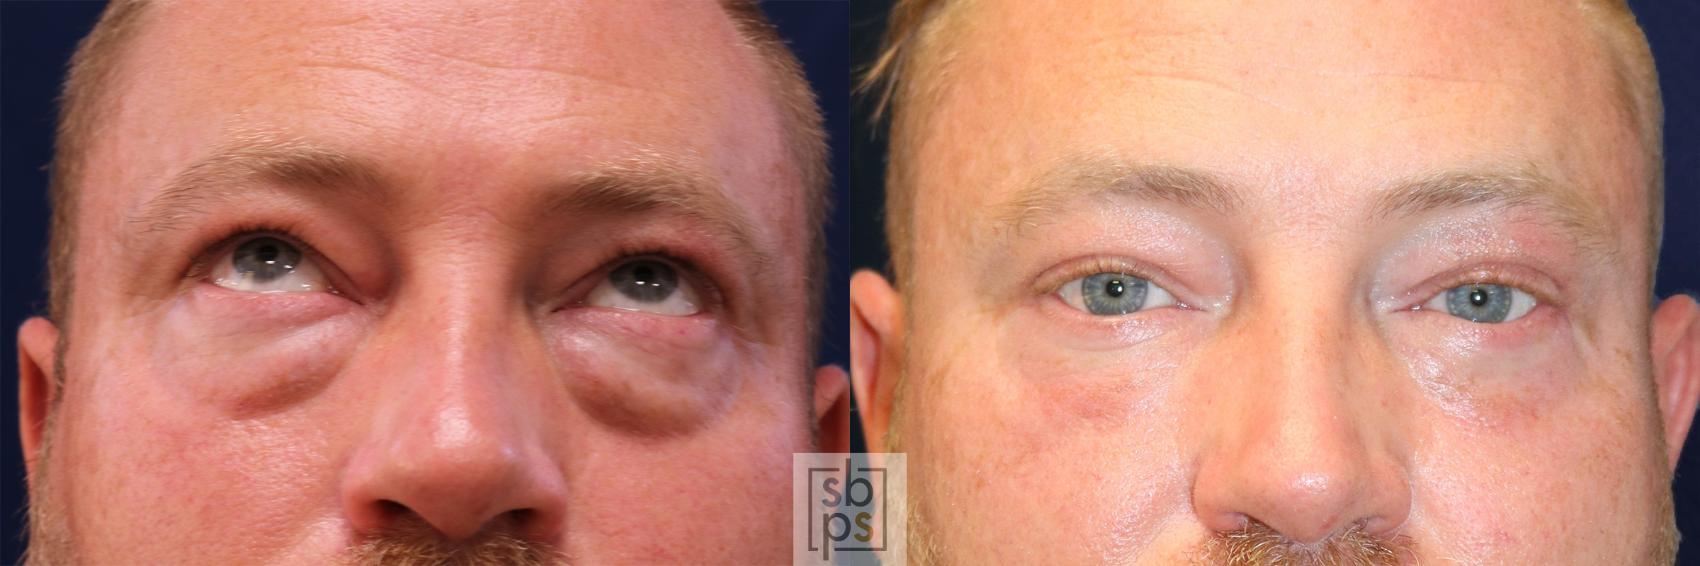 Before & After Eyelid Surgery (Blepharoplasty) Case 558 Front View in Torrance, CA